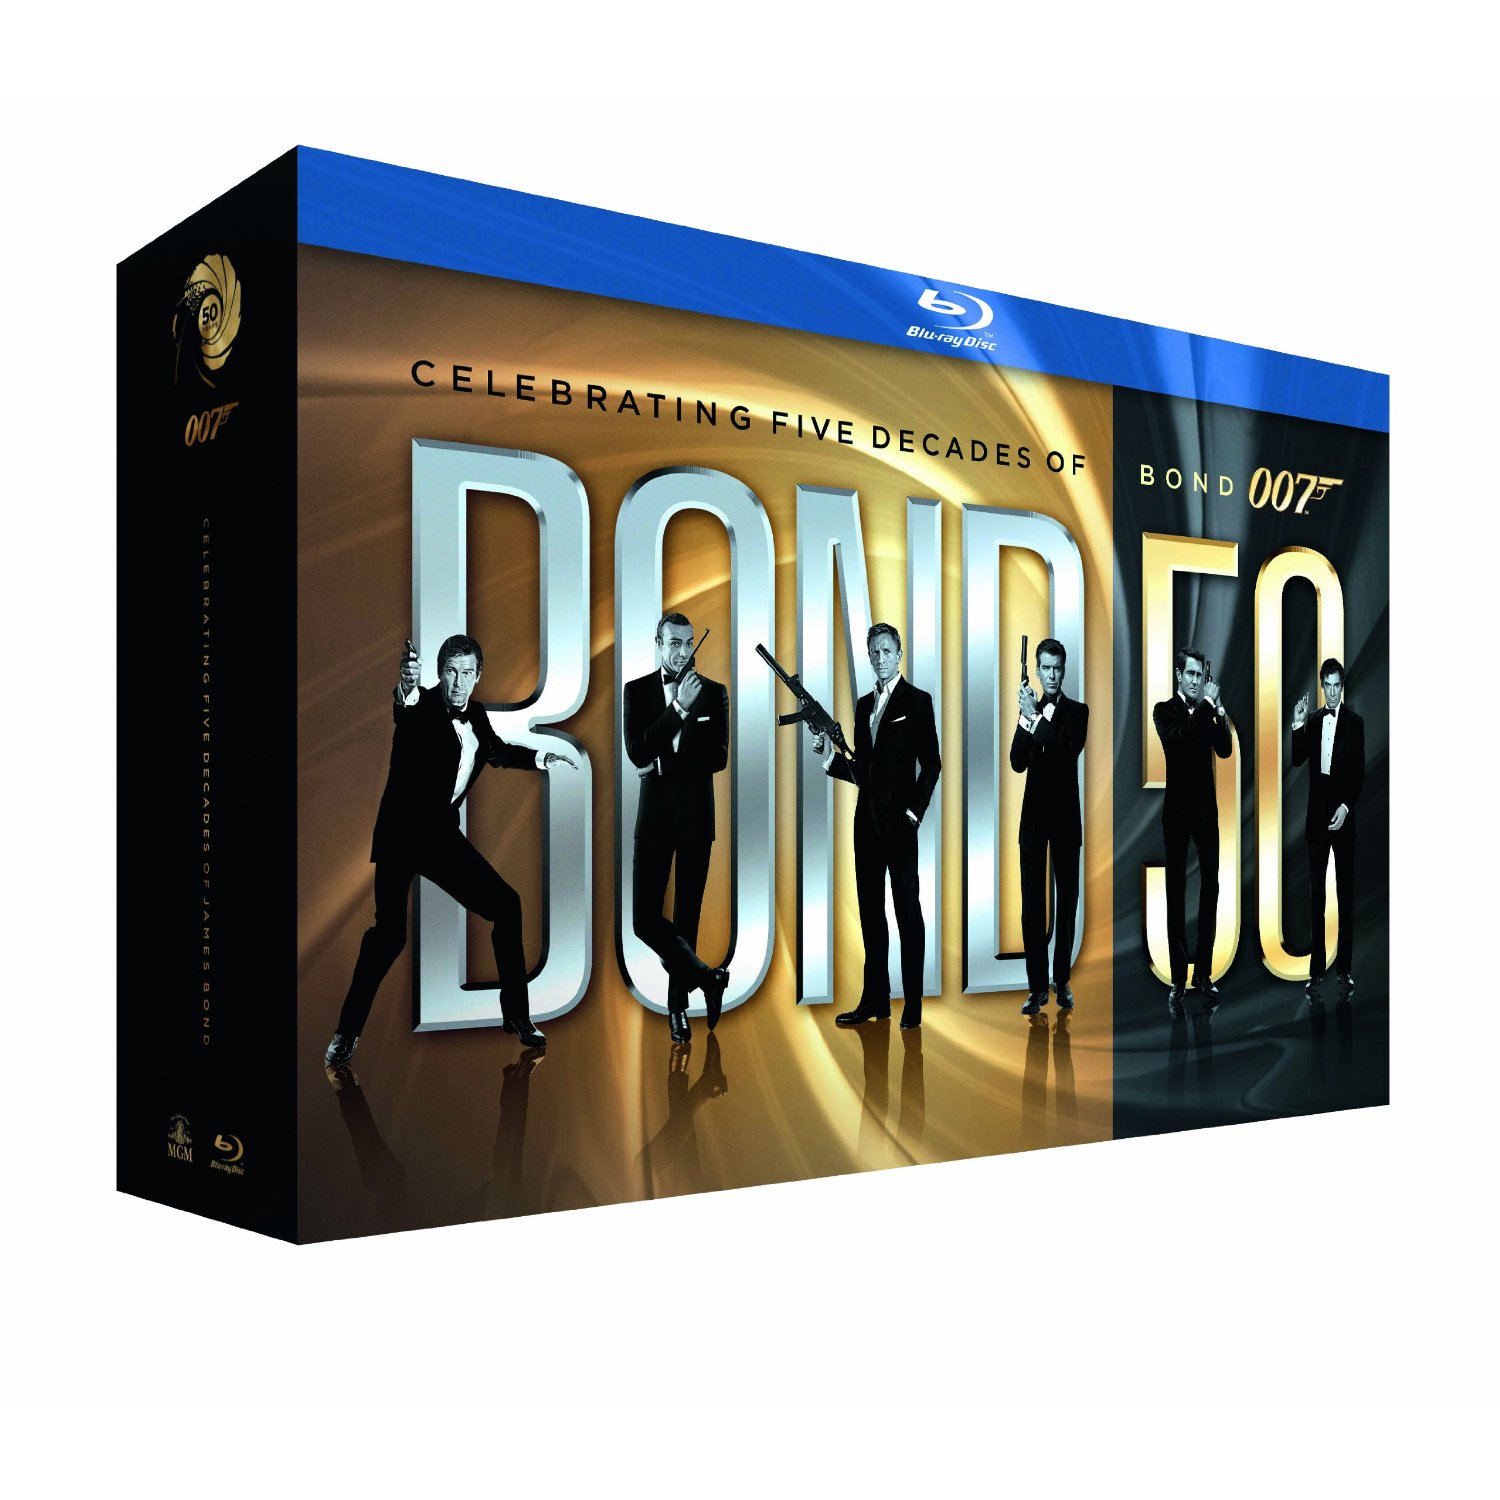 James Bond Returns in “Bond 50” Blu-Ray Collection – Announced & Available to Pre-order on Amazon